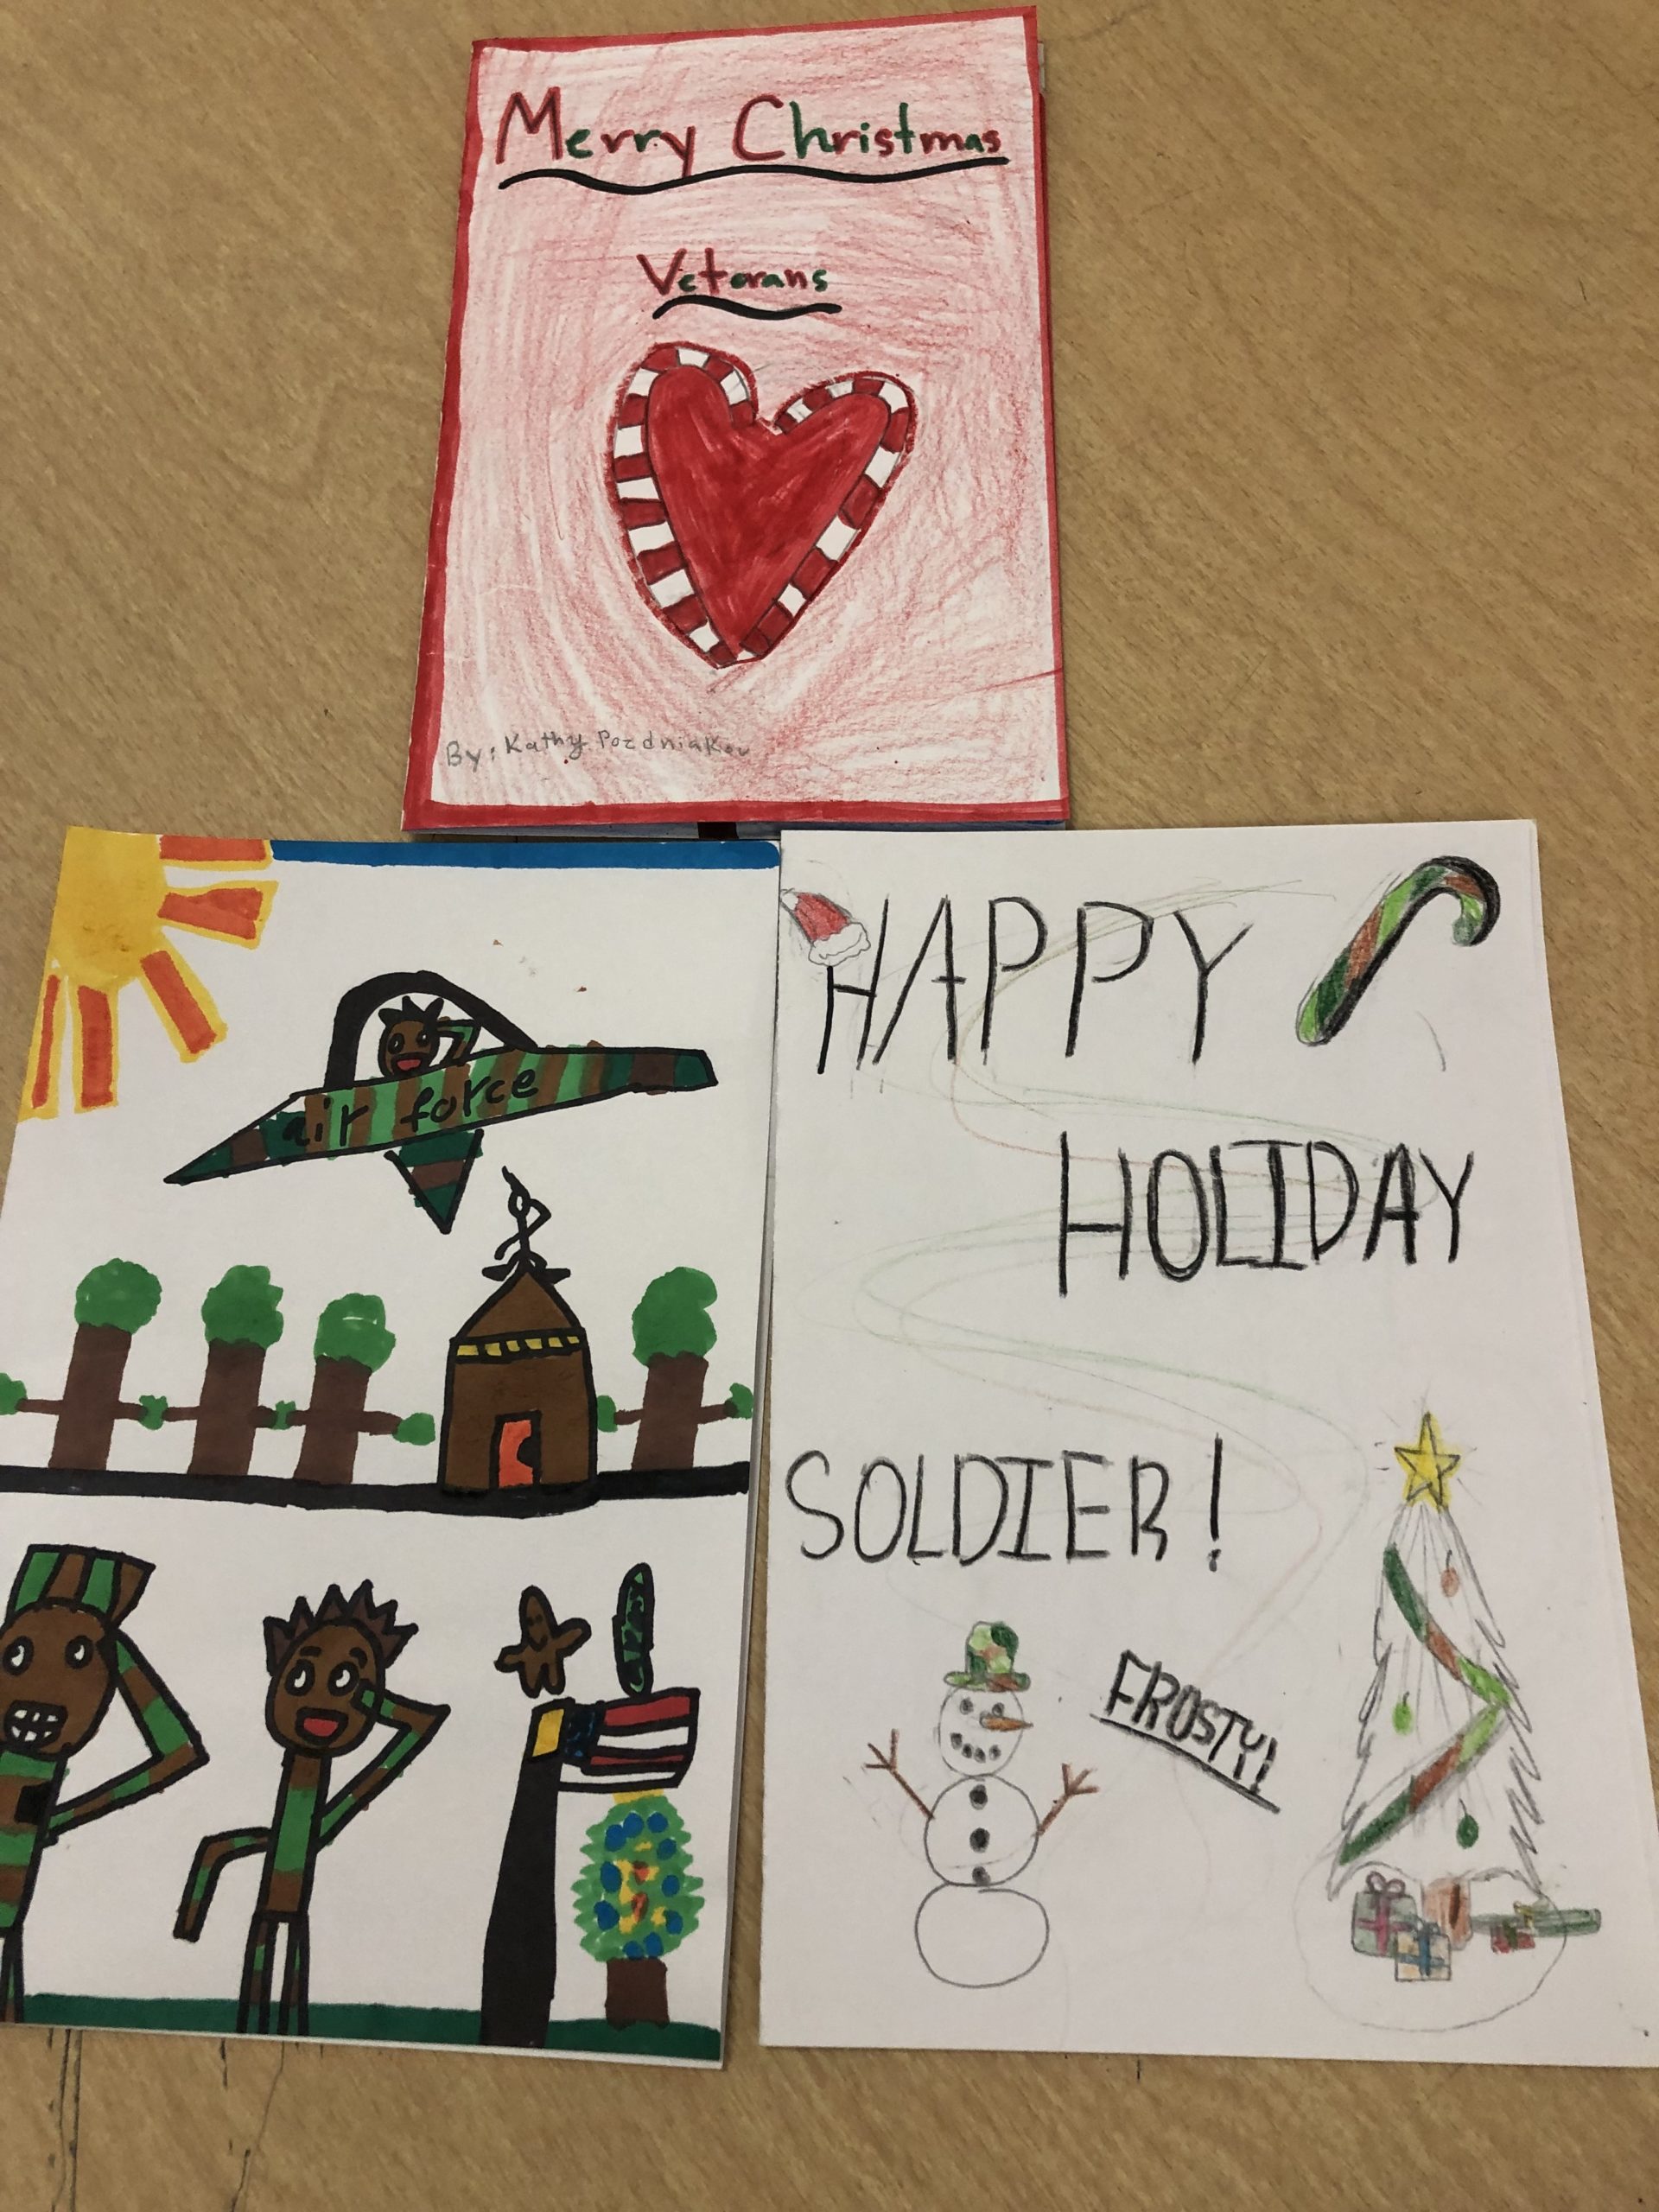 Hampton Bays Elementary School students have been generating holiday cheer for the troops by writing holiday cards that will be delivered to troops in Colorado, Washington state, Washington, D.C., and veterans in Veterans Administration hospitals in Washington, D.C. and Northport.